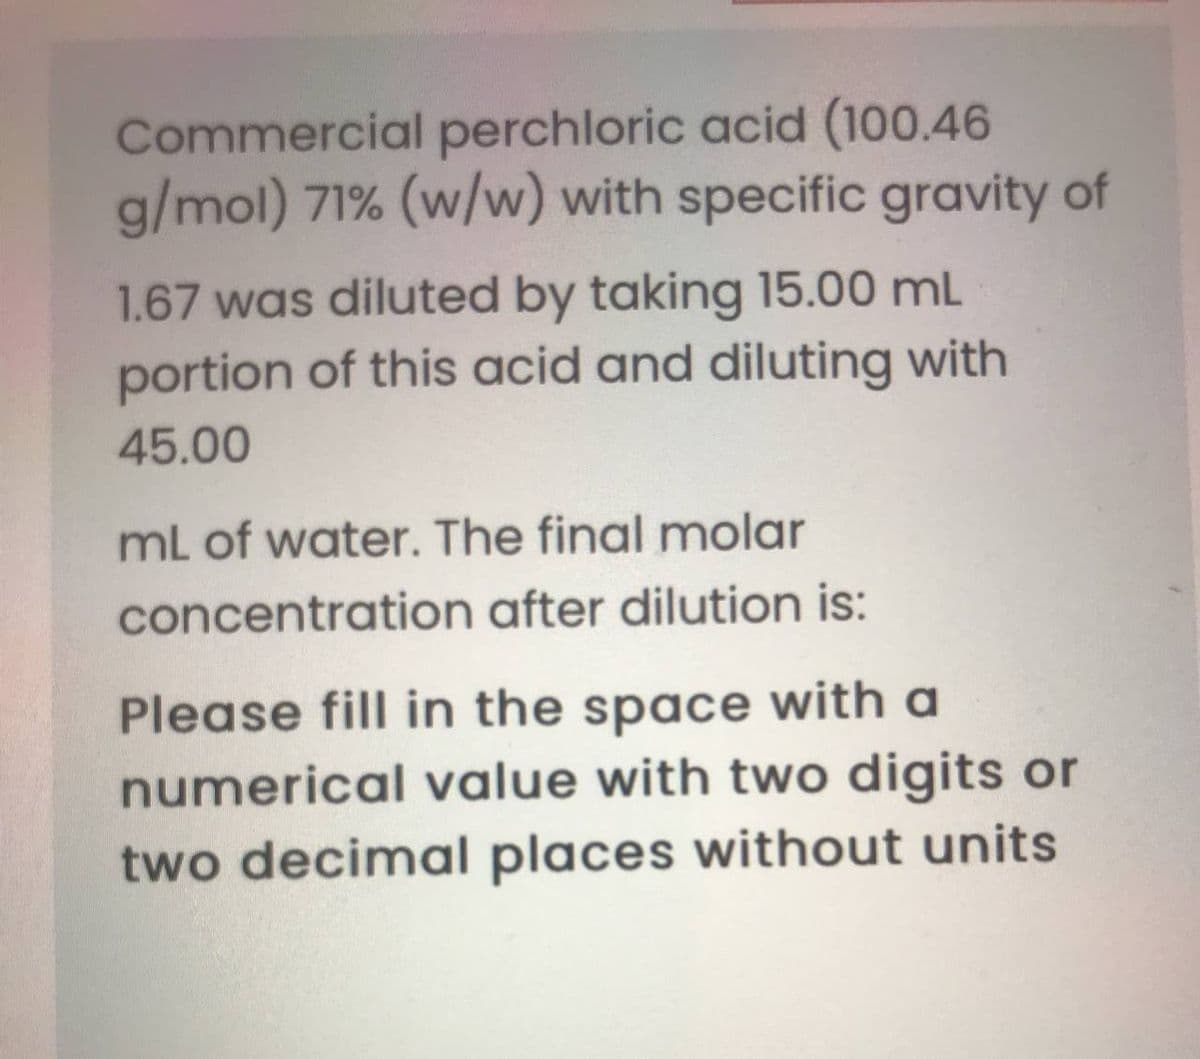 Commercial perchloric acid (100.46
g/mol) 71% (w/w) with specific gravity of
1.67 was diluted by taking 15.00 mL
portion of this acid and diluting with
45.00
mL of water. The final molar
concentration after dilution is:
Please fill in the space with a
numerical value with two digits or
two decimal places without units
